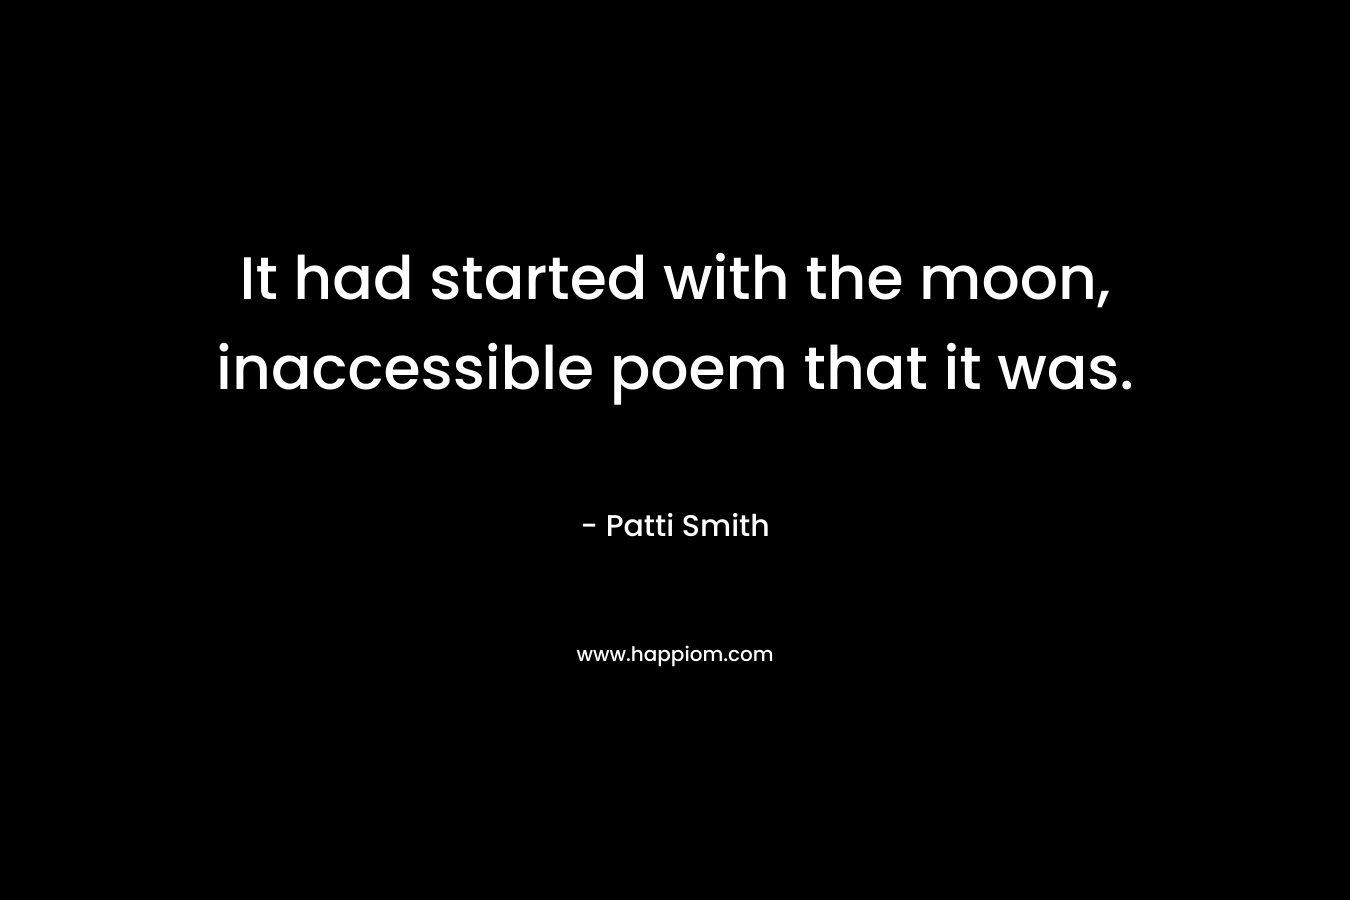 It had started with the moon, inaccessible poem that it was. – Patti Smith